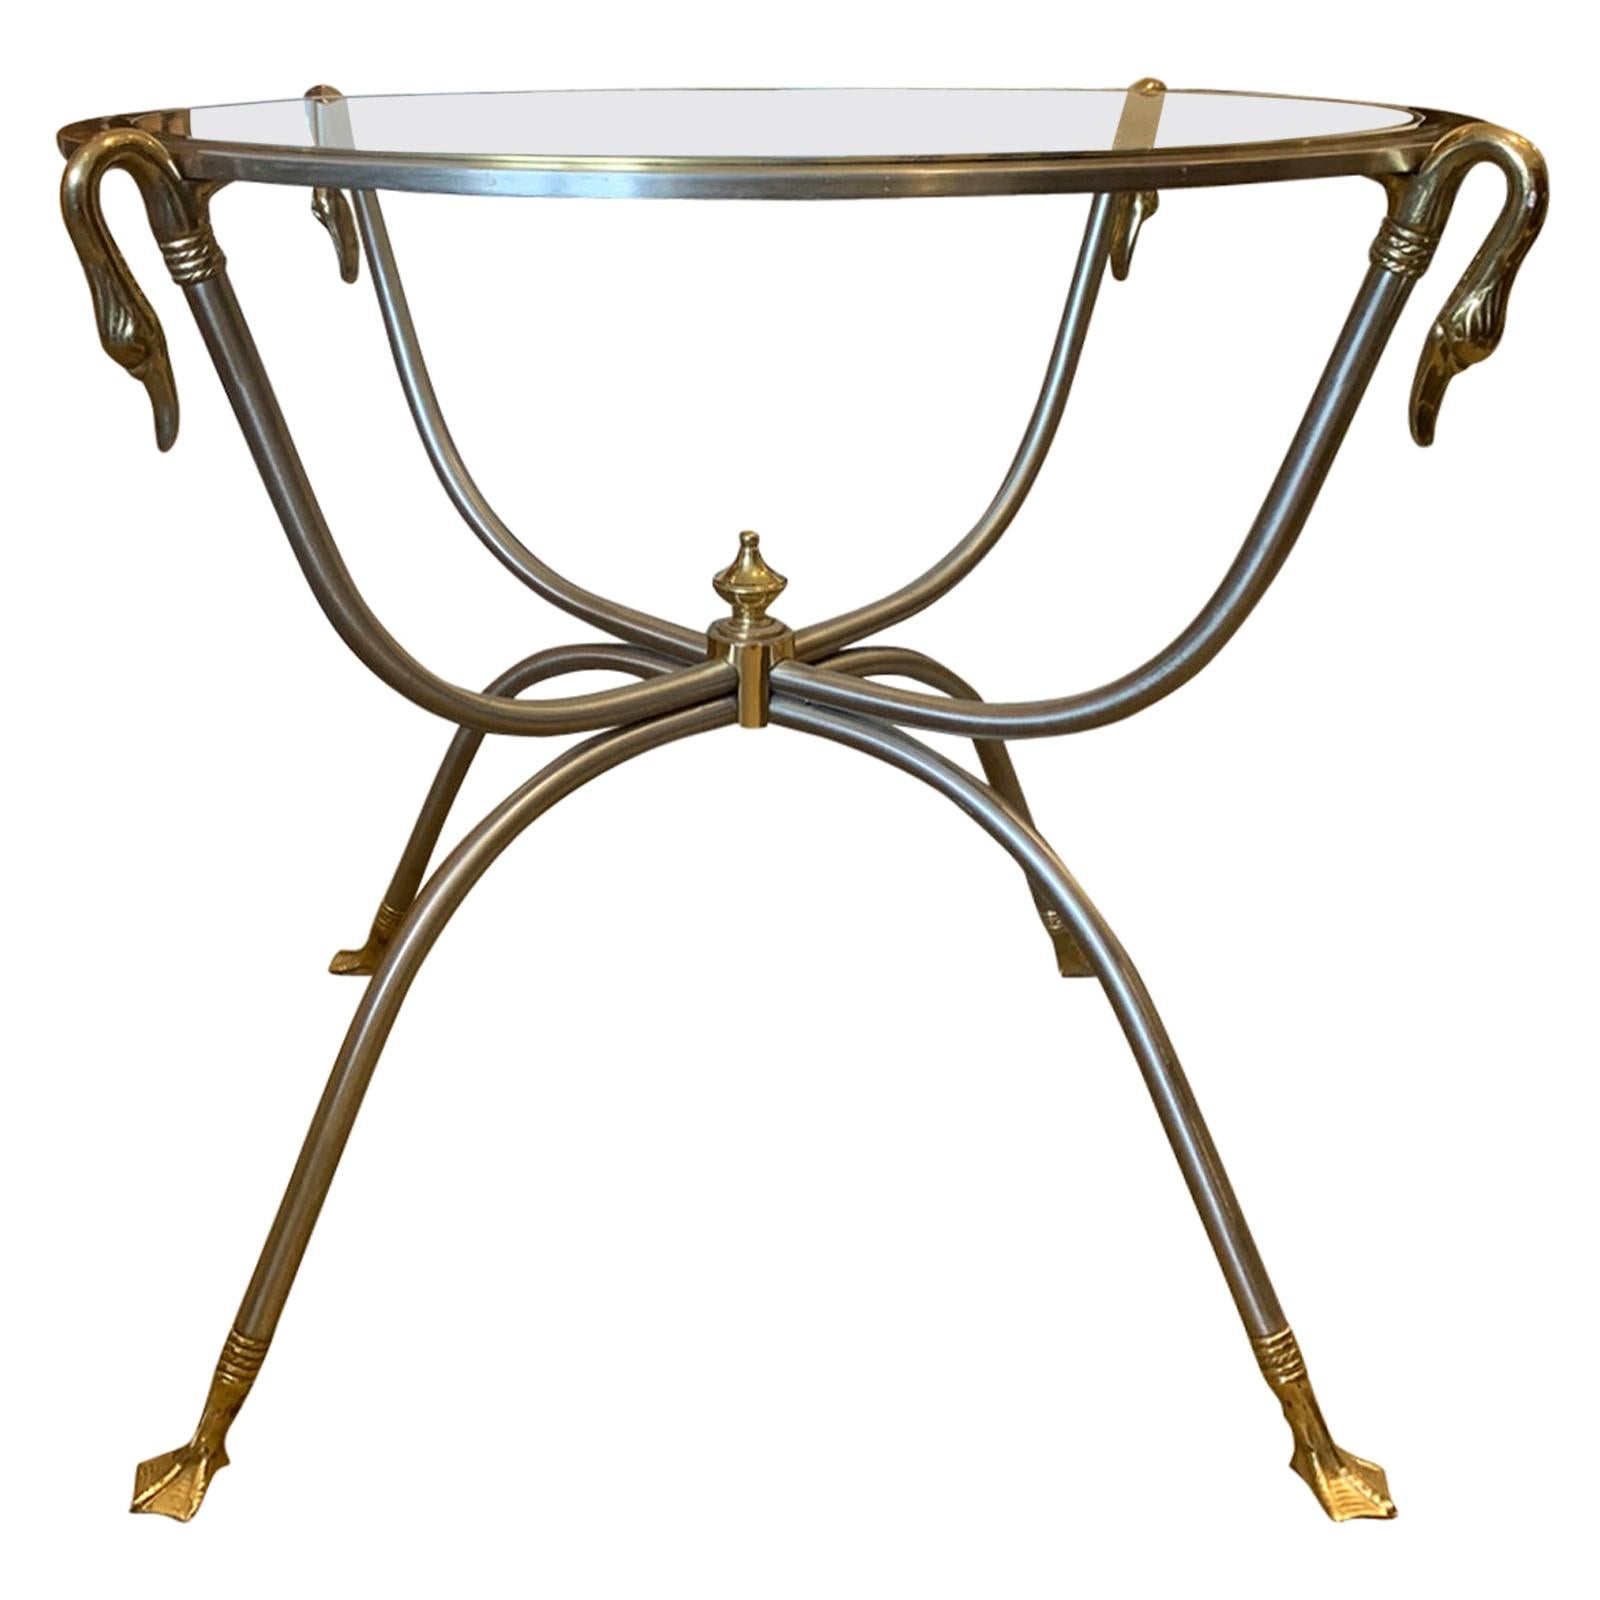 Mid-20th Century Steel and Brass Gueridon Glass Top Table, Ducks Heads and Feet